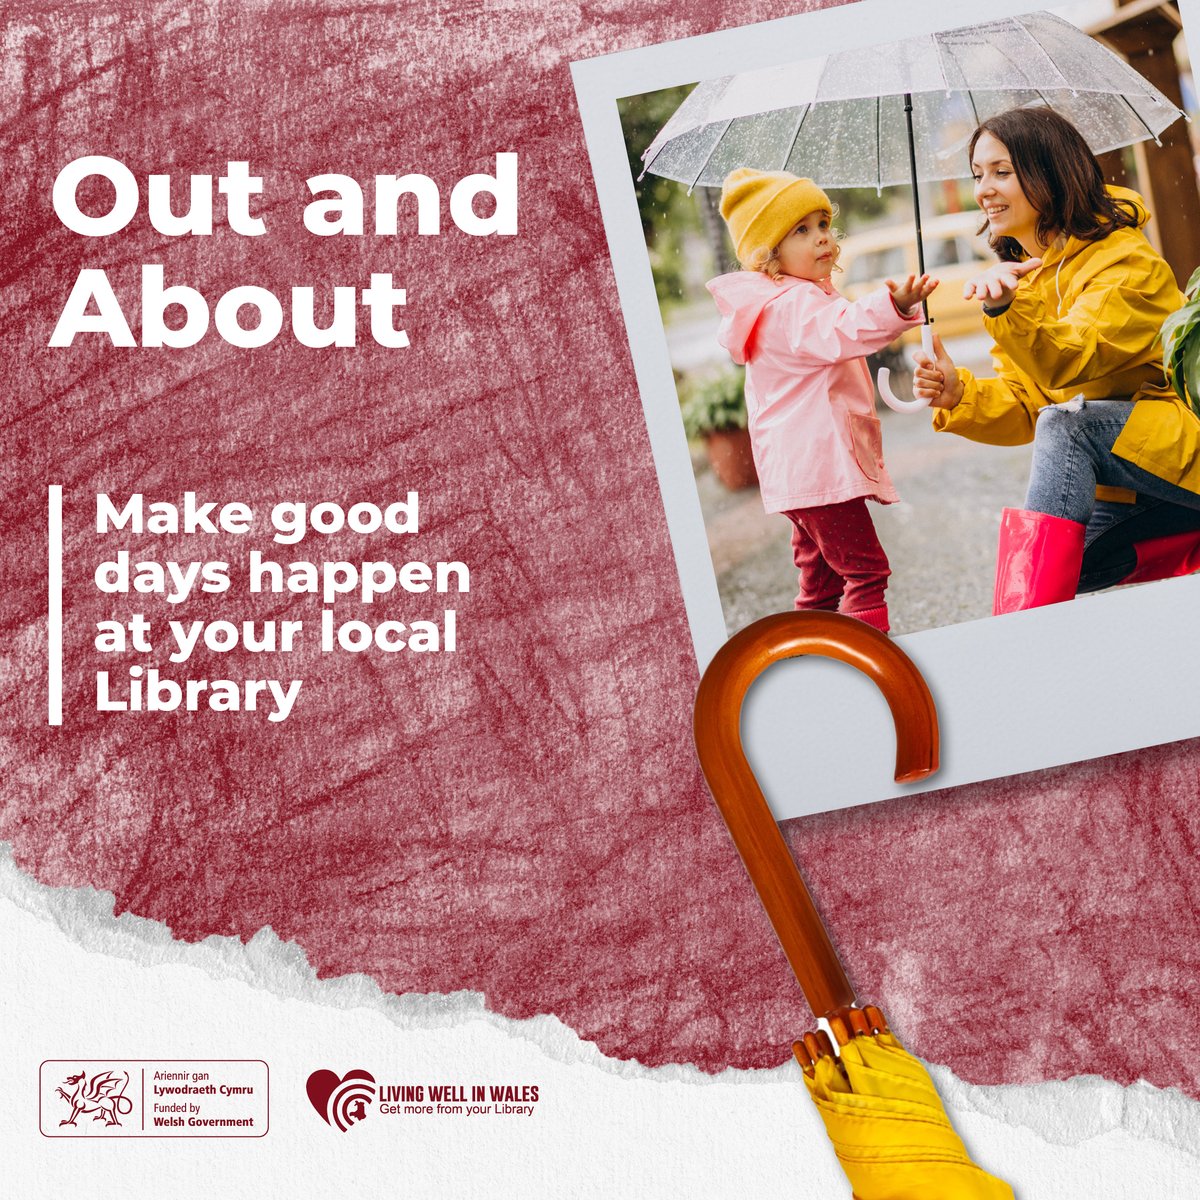 Make good days happen - meeting a friend for a chat in the library, going for a coffee, a play date or a walk after your visit can make all the difference in your day. Click here to find out what’s on at your local library aura.wales/libraries/